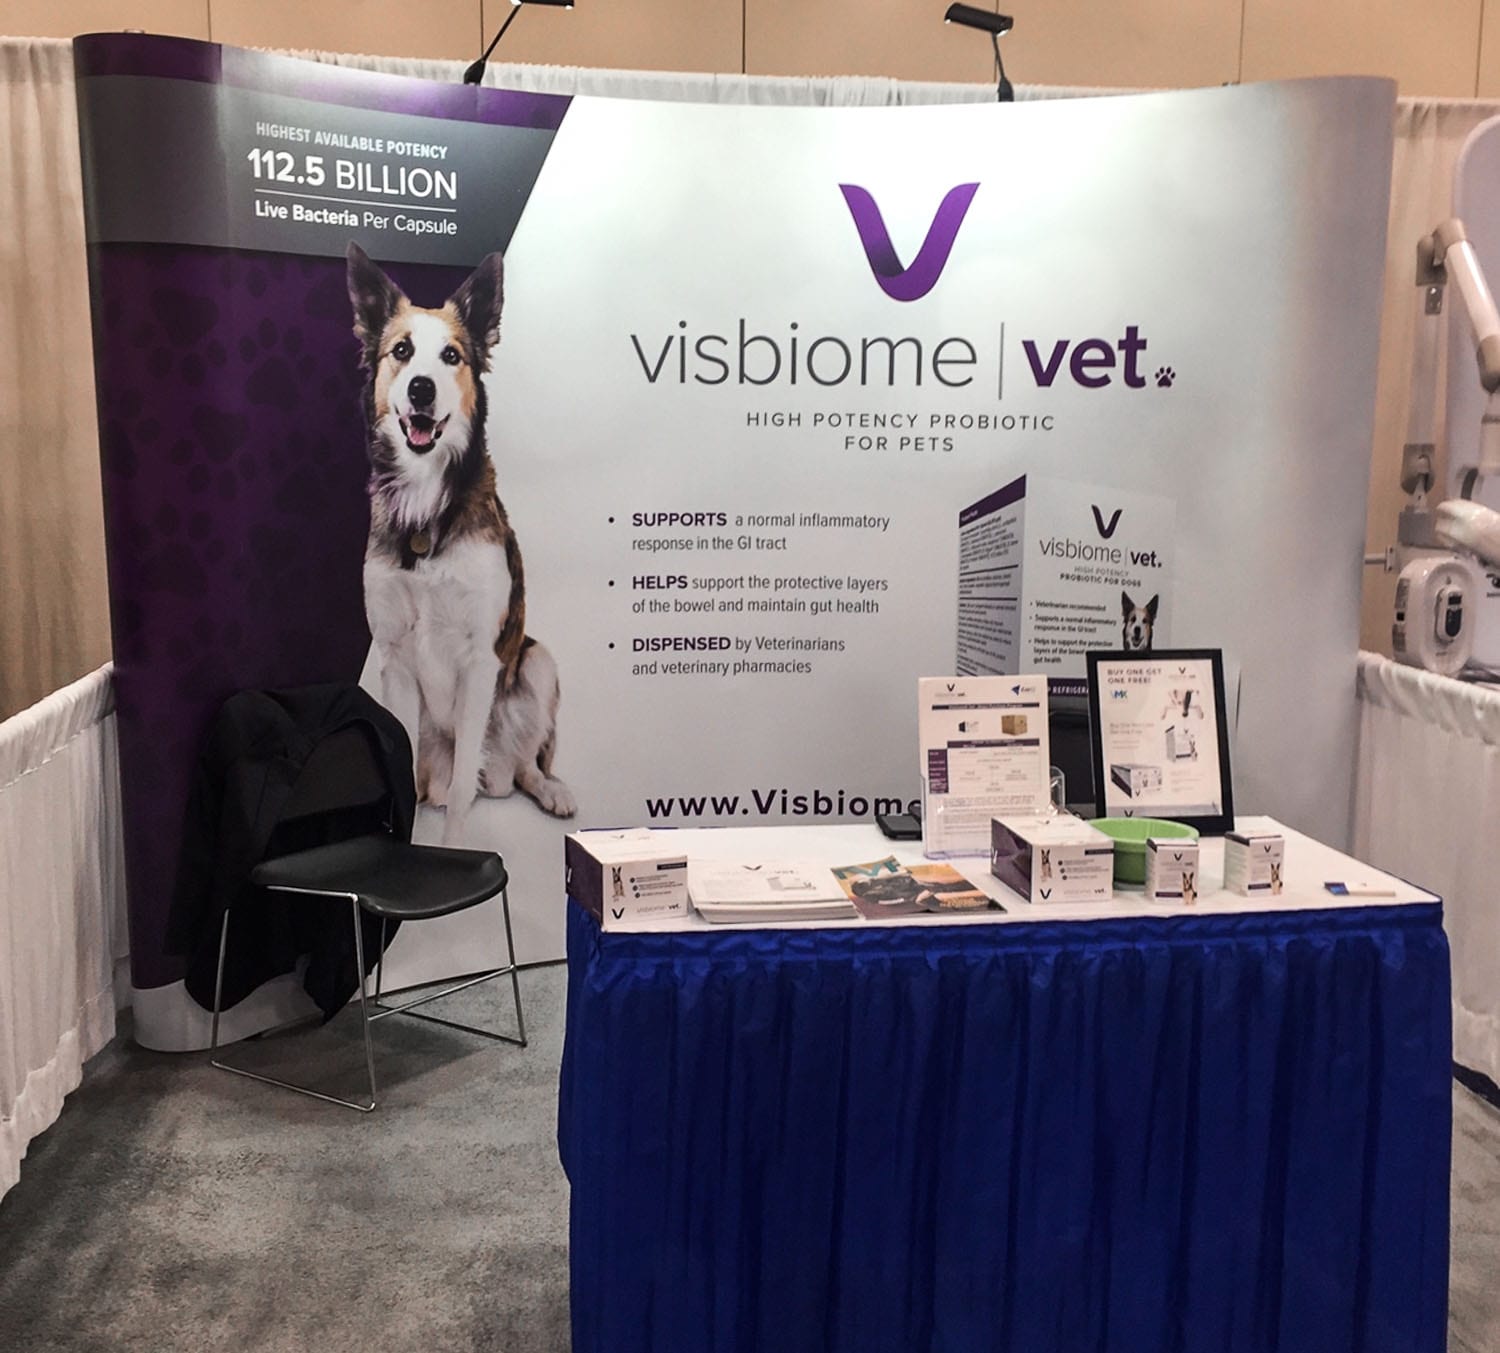 Booth for Visbiome Vet for High Potency Pet Probiotics with promotion materials